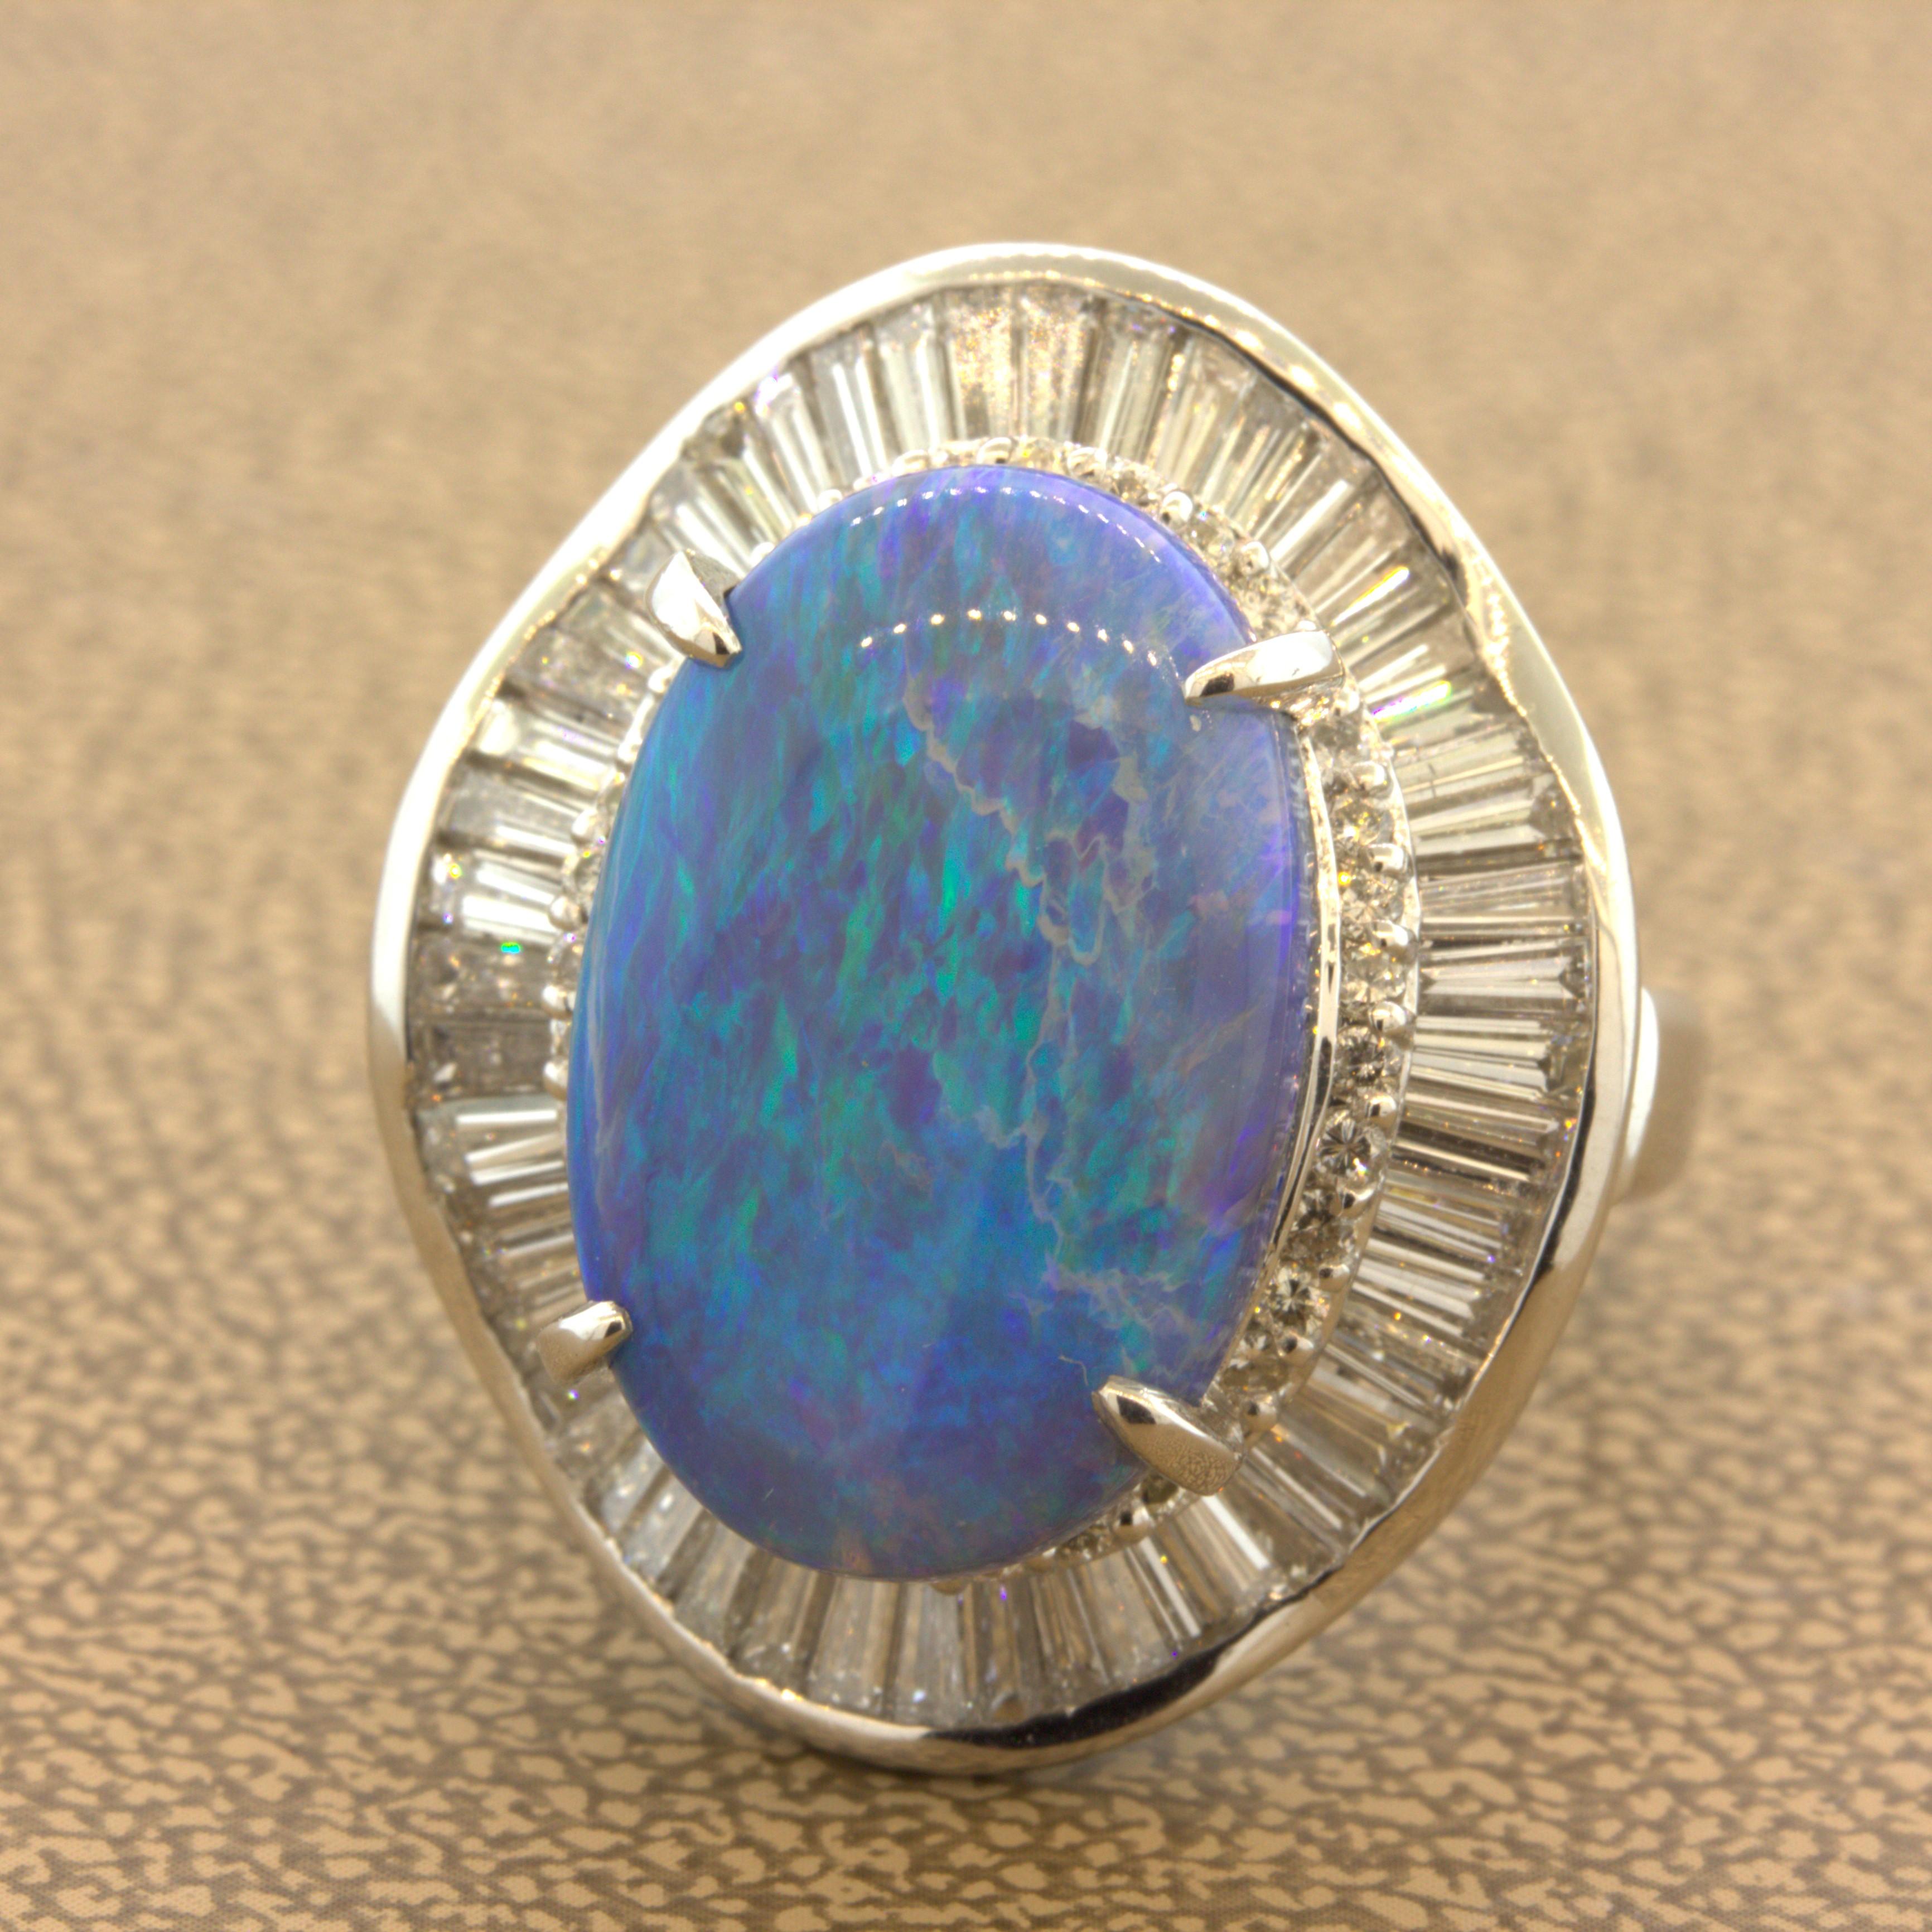 A large and impressive cocktail ring featuring a natural Australian black opal weighing 9.27 carats. It has excellent color as various shades of blue and green radiate across the stone. It is surrounded by a spiraling halo of round brilliant and